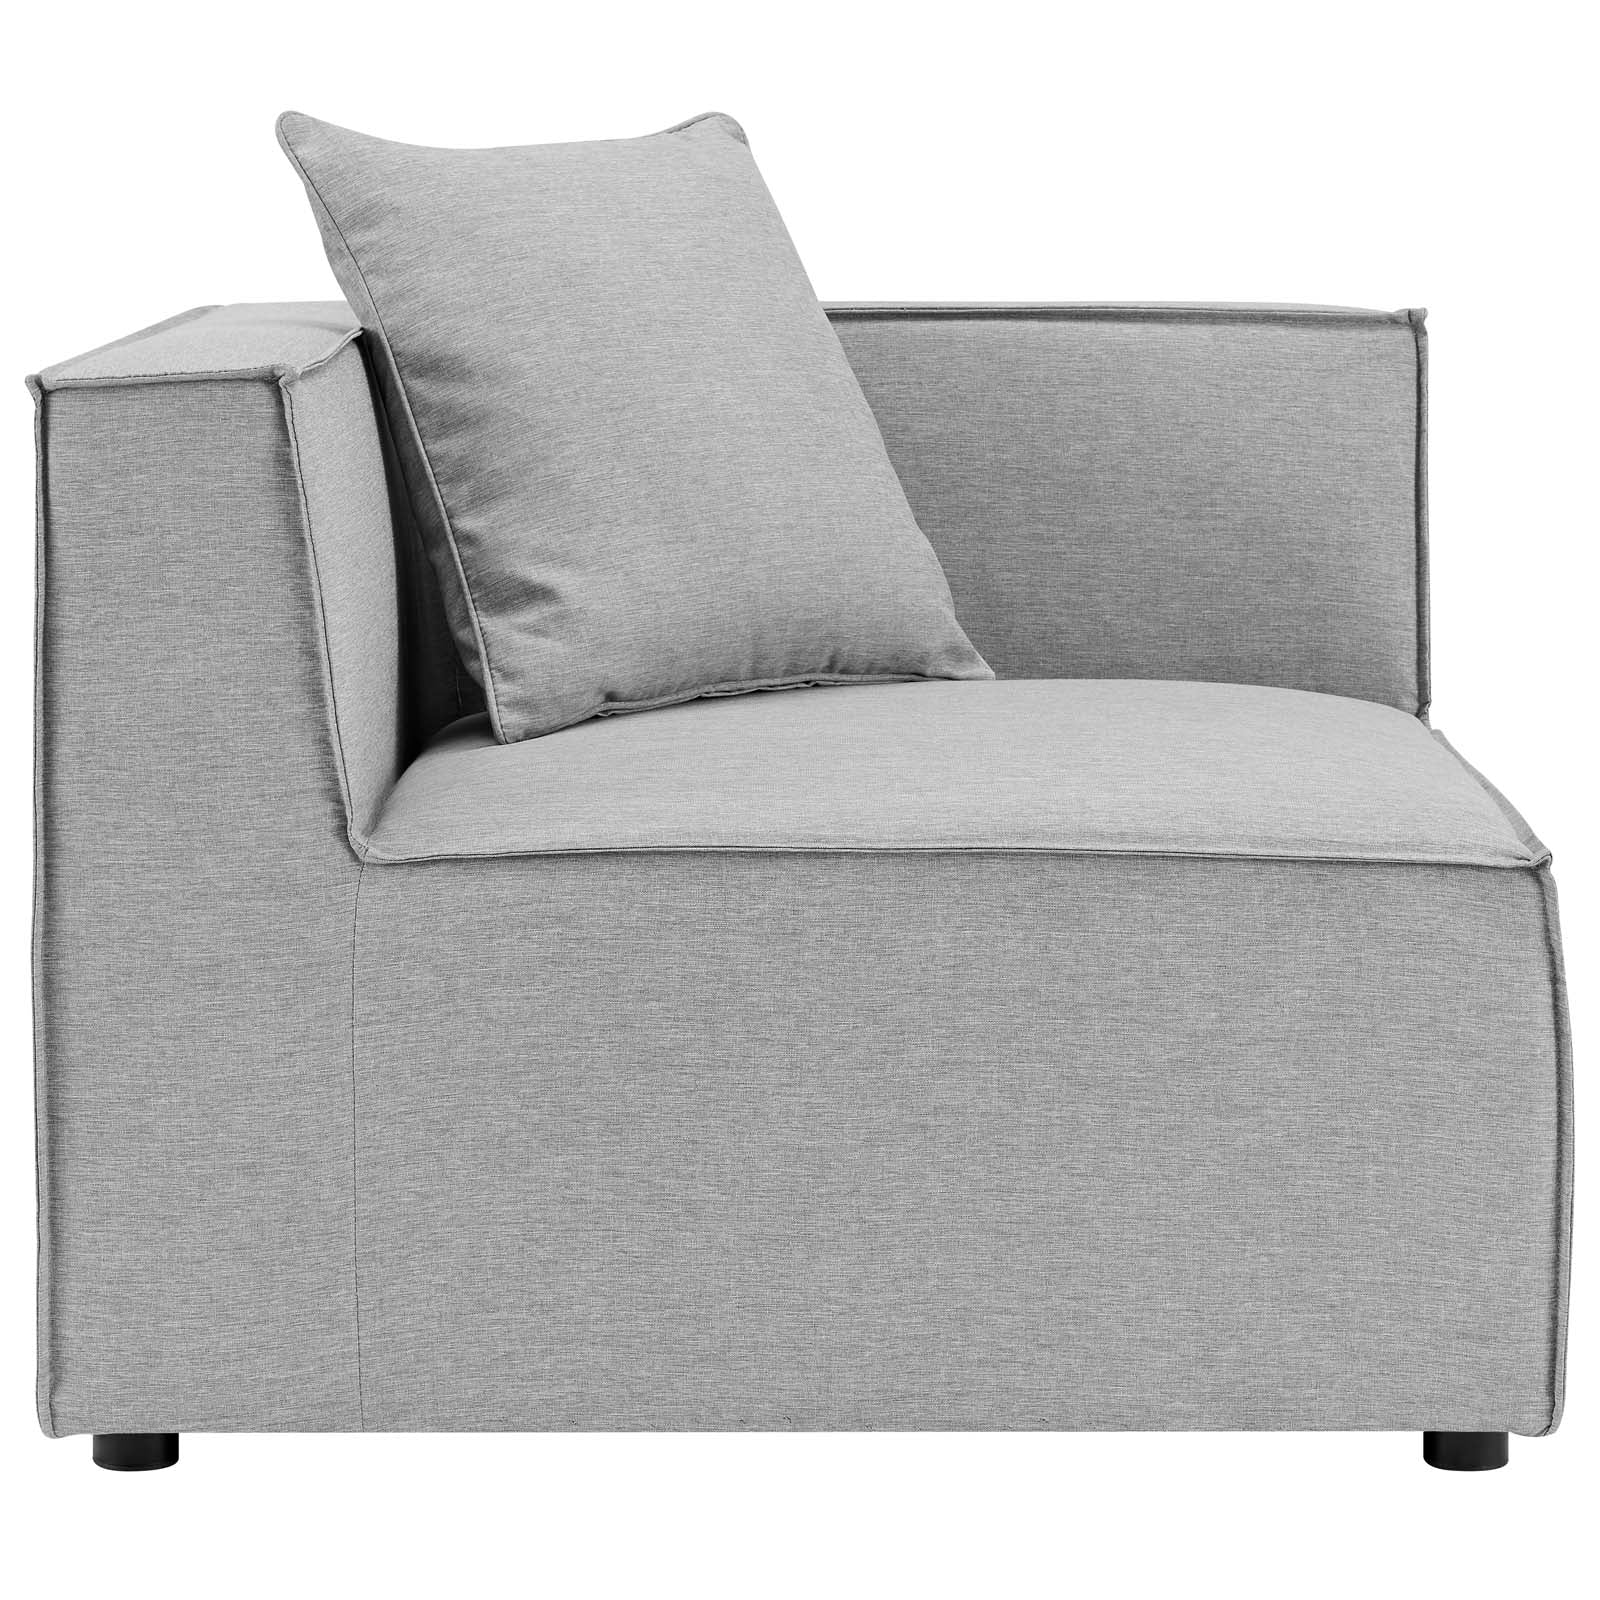 Saybrook Outdoor Patio Upholstered Loveseat and Ottoman Set - East Shore Modern Home Furnishings